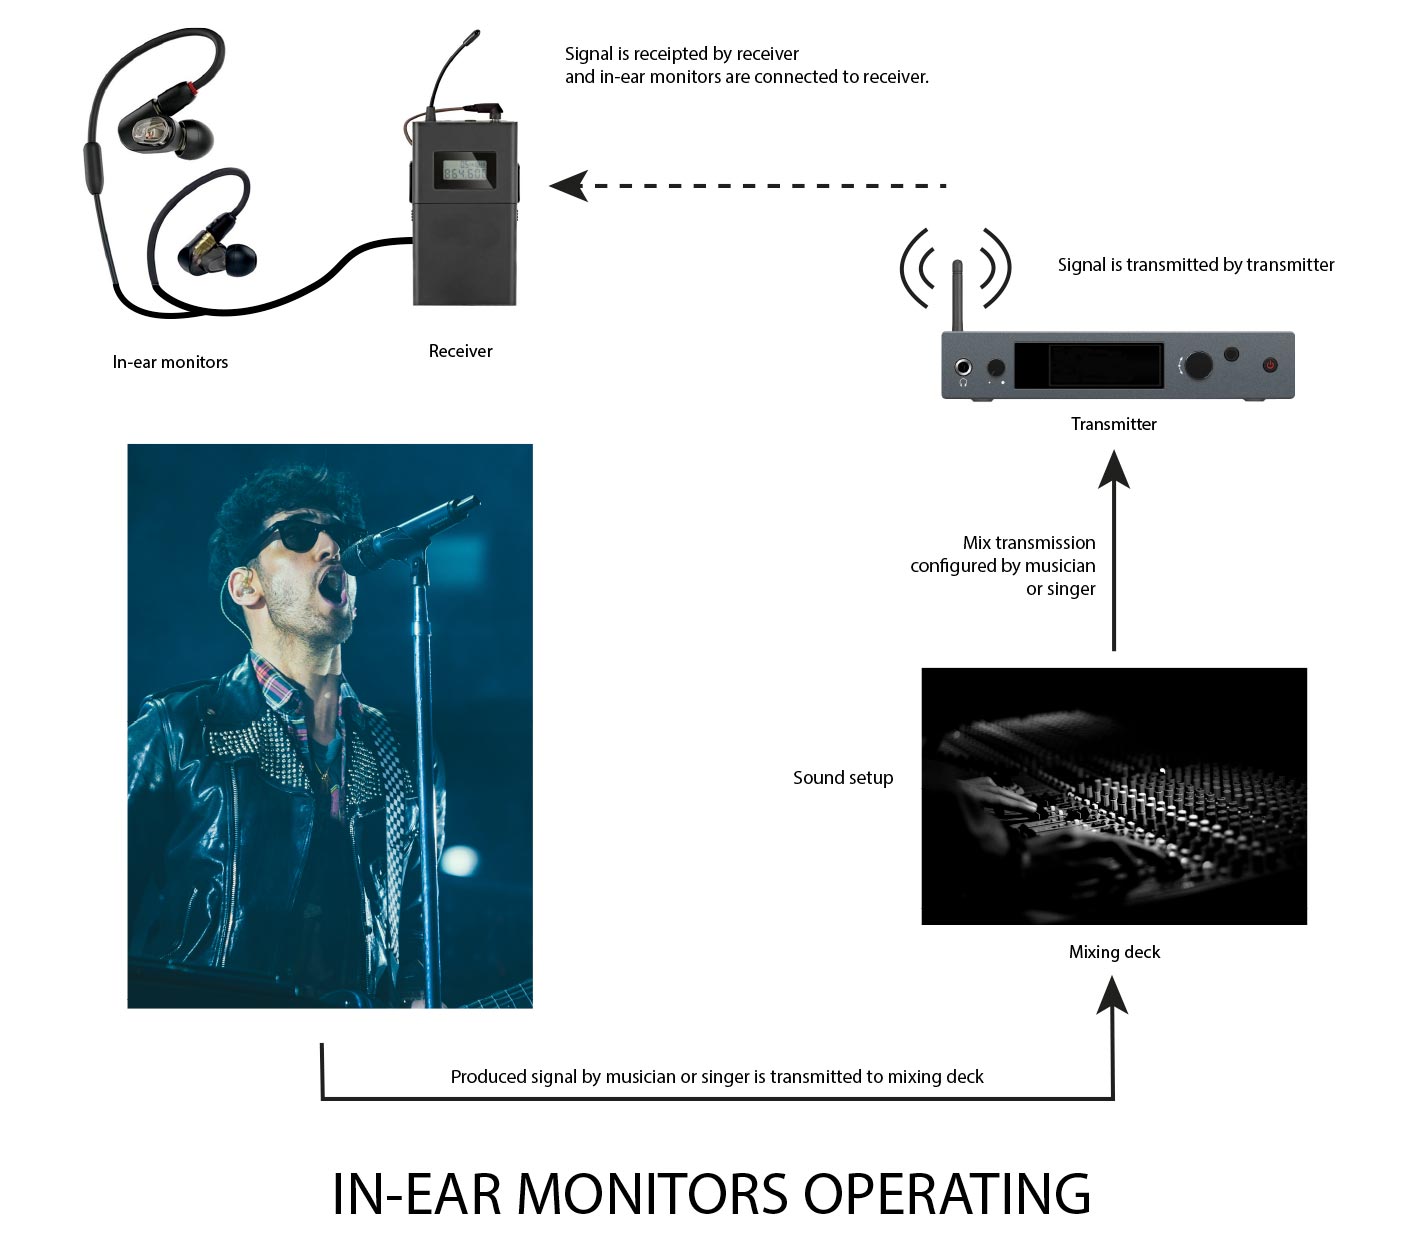 Why do musicians use in-ear monitors?